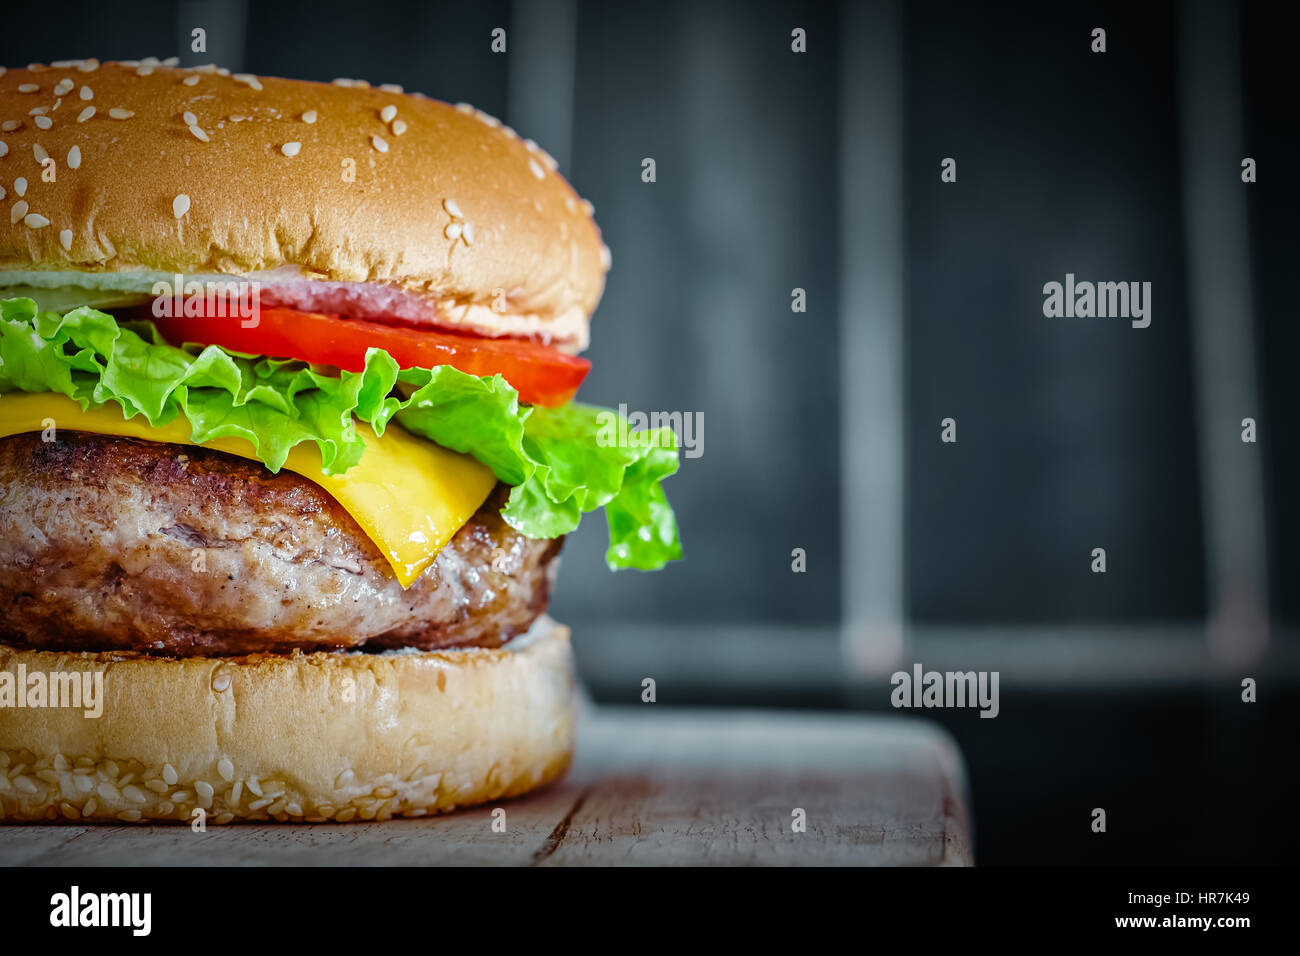 Tasty grilled beef Burger on wood background Stock Photo